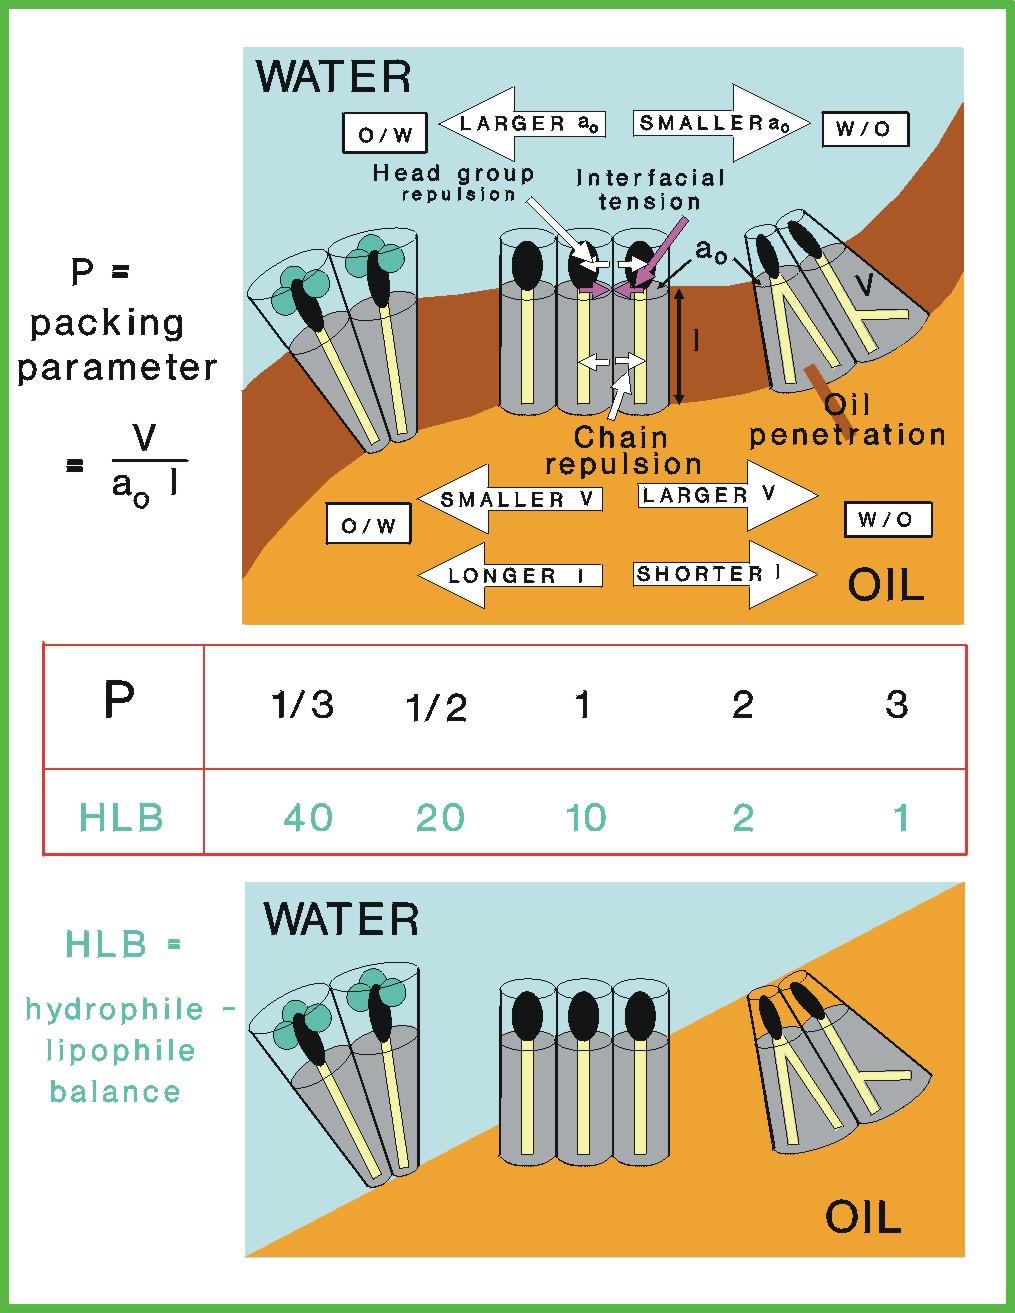 Packing Parameter is inversely related to HLB mid point of packing parameter P = 1